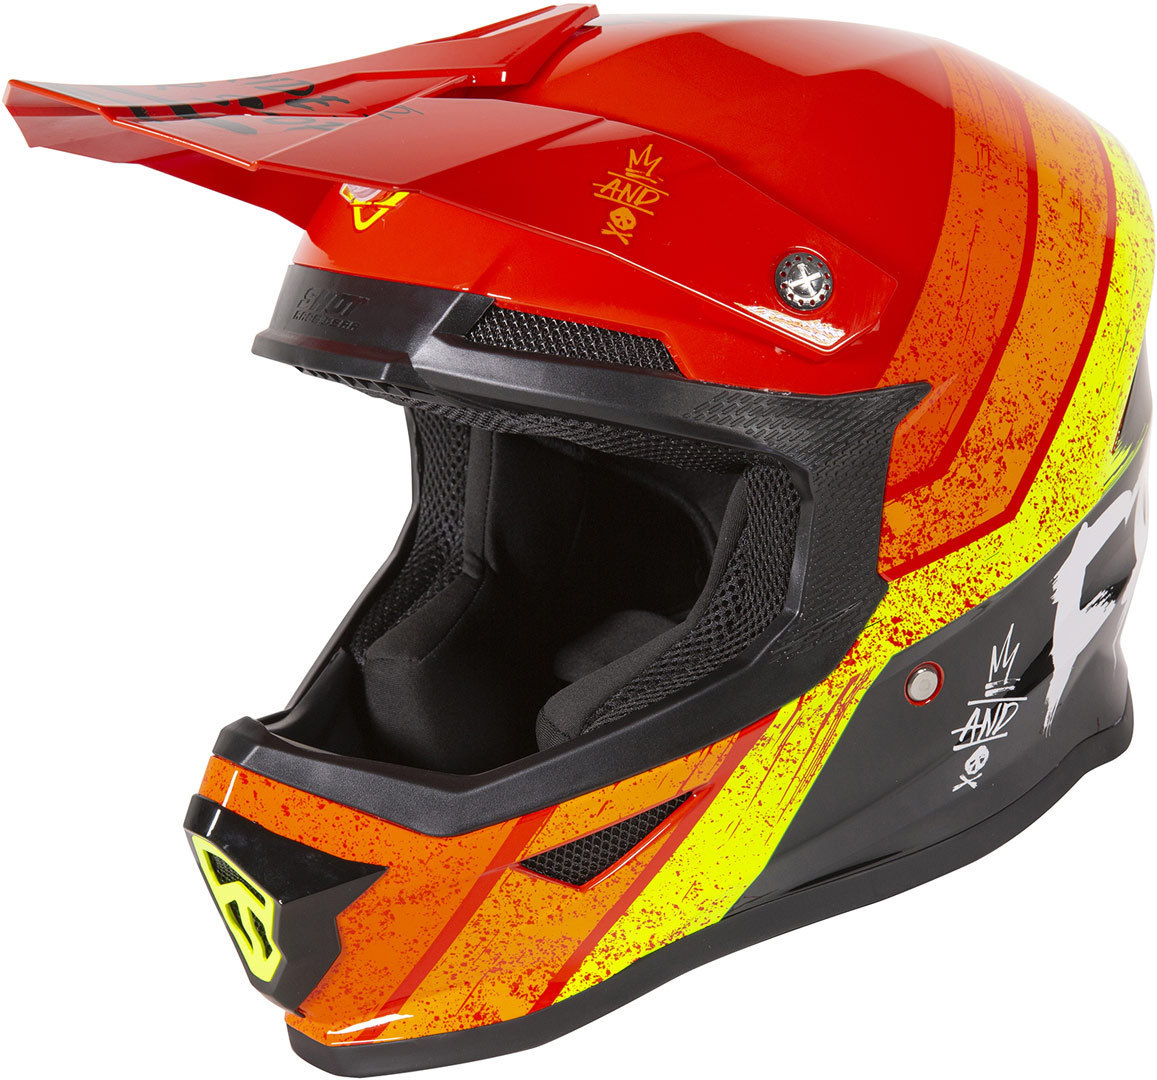 Image of Casque cross Shot by Freegun XP-4 - STRIPE - RED GLOSSY 2021